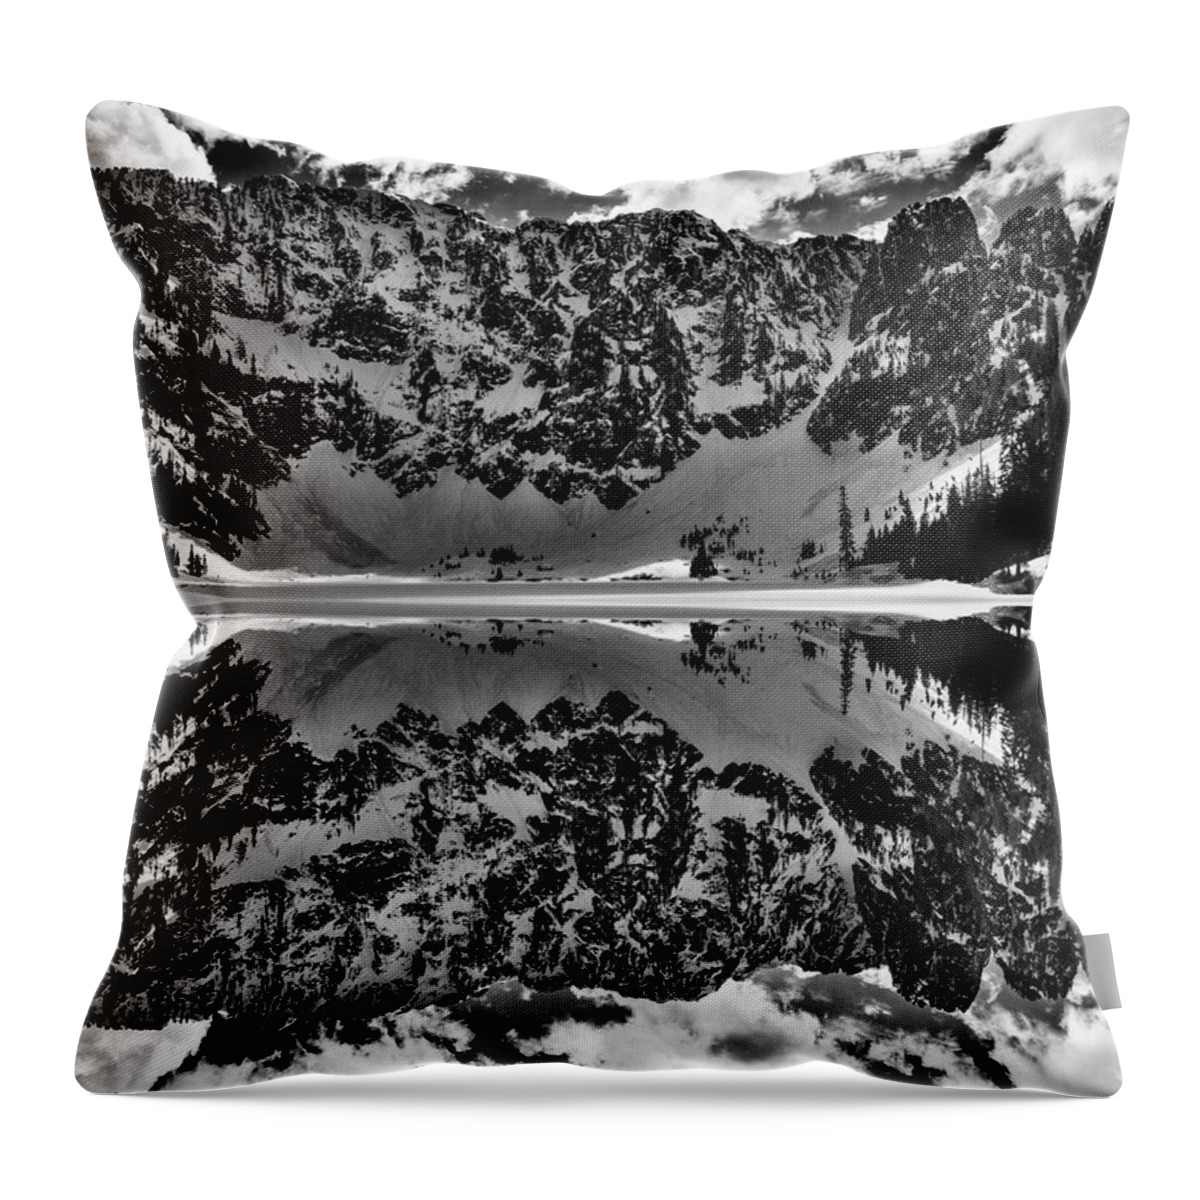 Reflection Throw Pillow featuring the digital art Lake 22 Winter Black and White Reflection by Pelo Blanco Photo